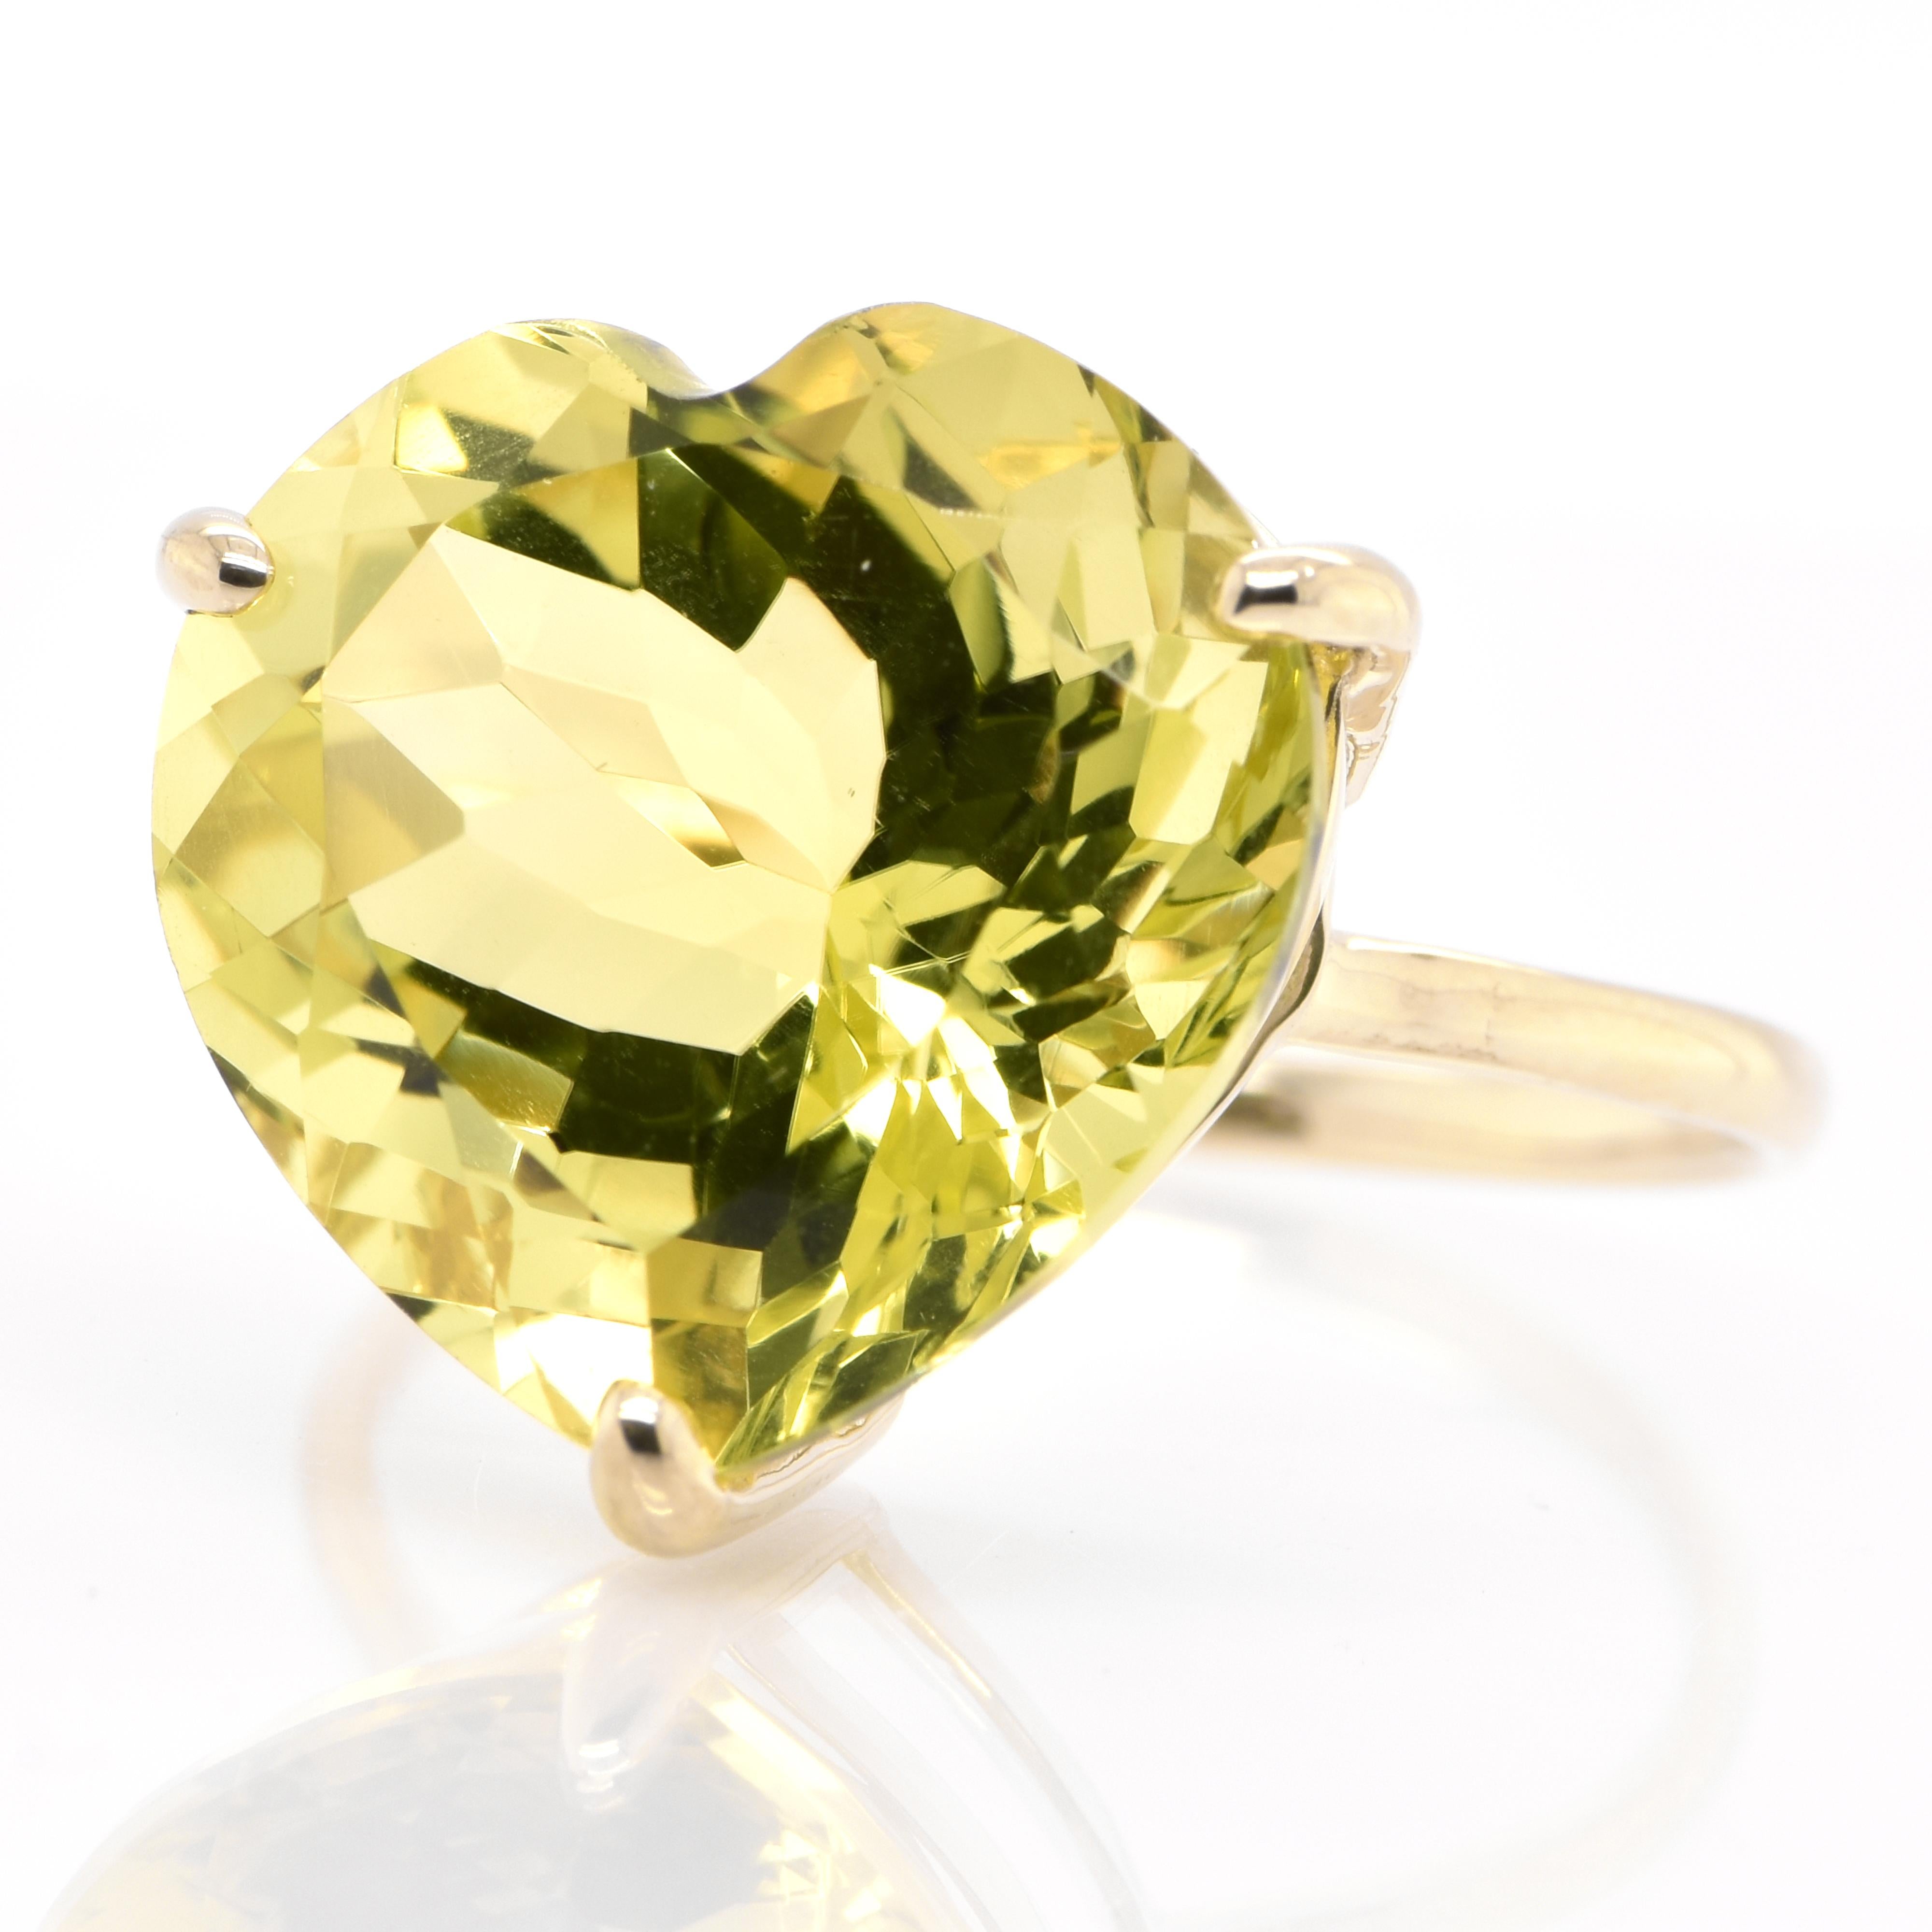 A beautiful Cocktail Ring featuring a 10.00 Carat, Natural Heart Cut Lemon Quartz set in 18 Karat Yellow Gold. From the earliest times, people confused Peridot with other gems such as Emerald and Topaz. Some historians believe that Cleopatra’s